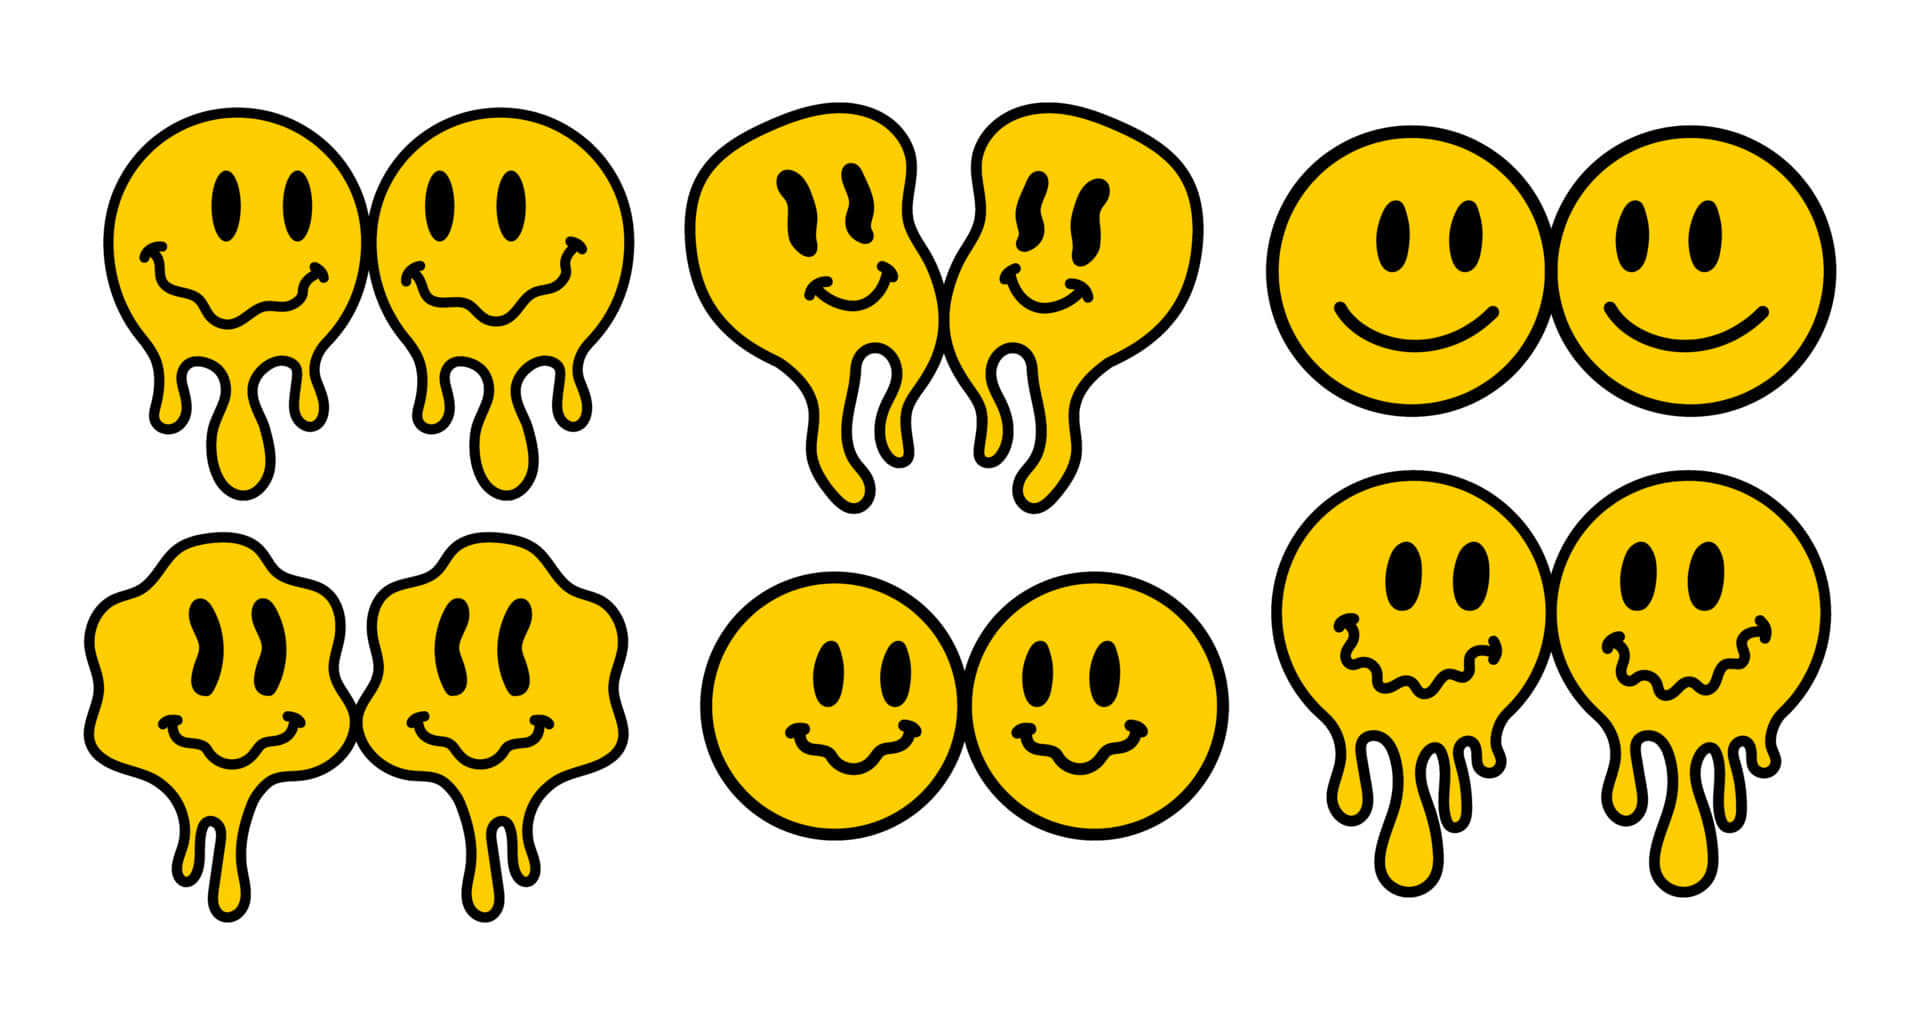 Big smiley emoji grinning face drawing color image • wall stickers  confused, round, big smile | myloview.com